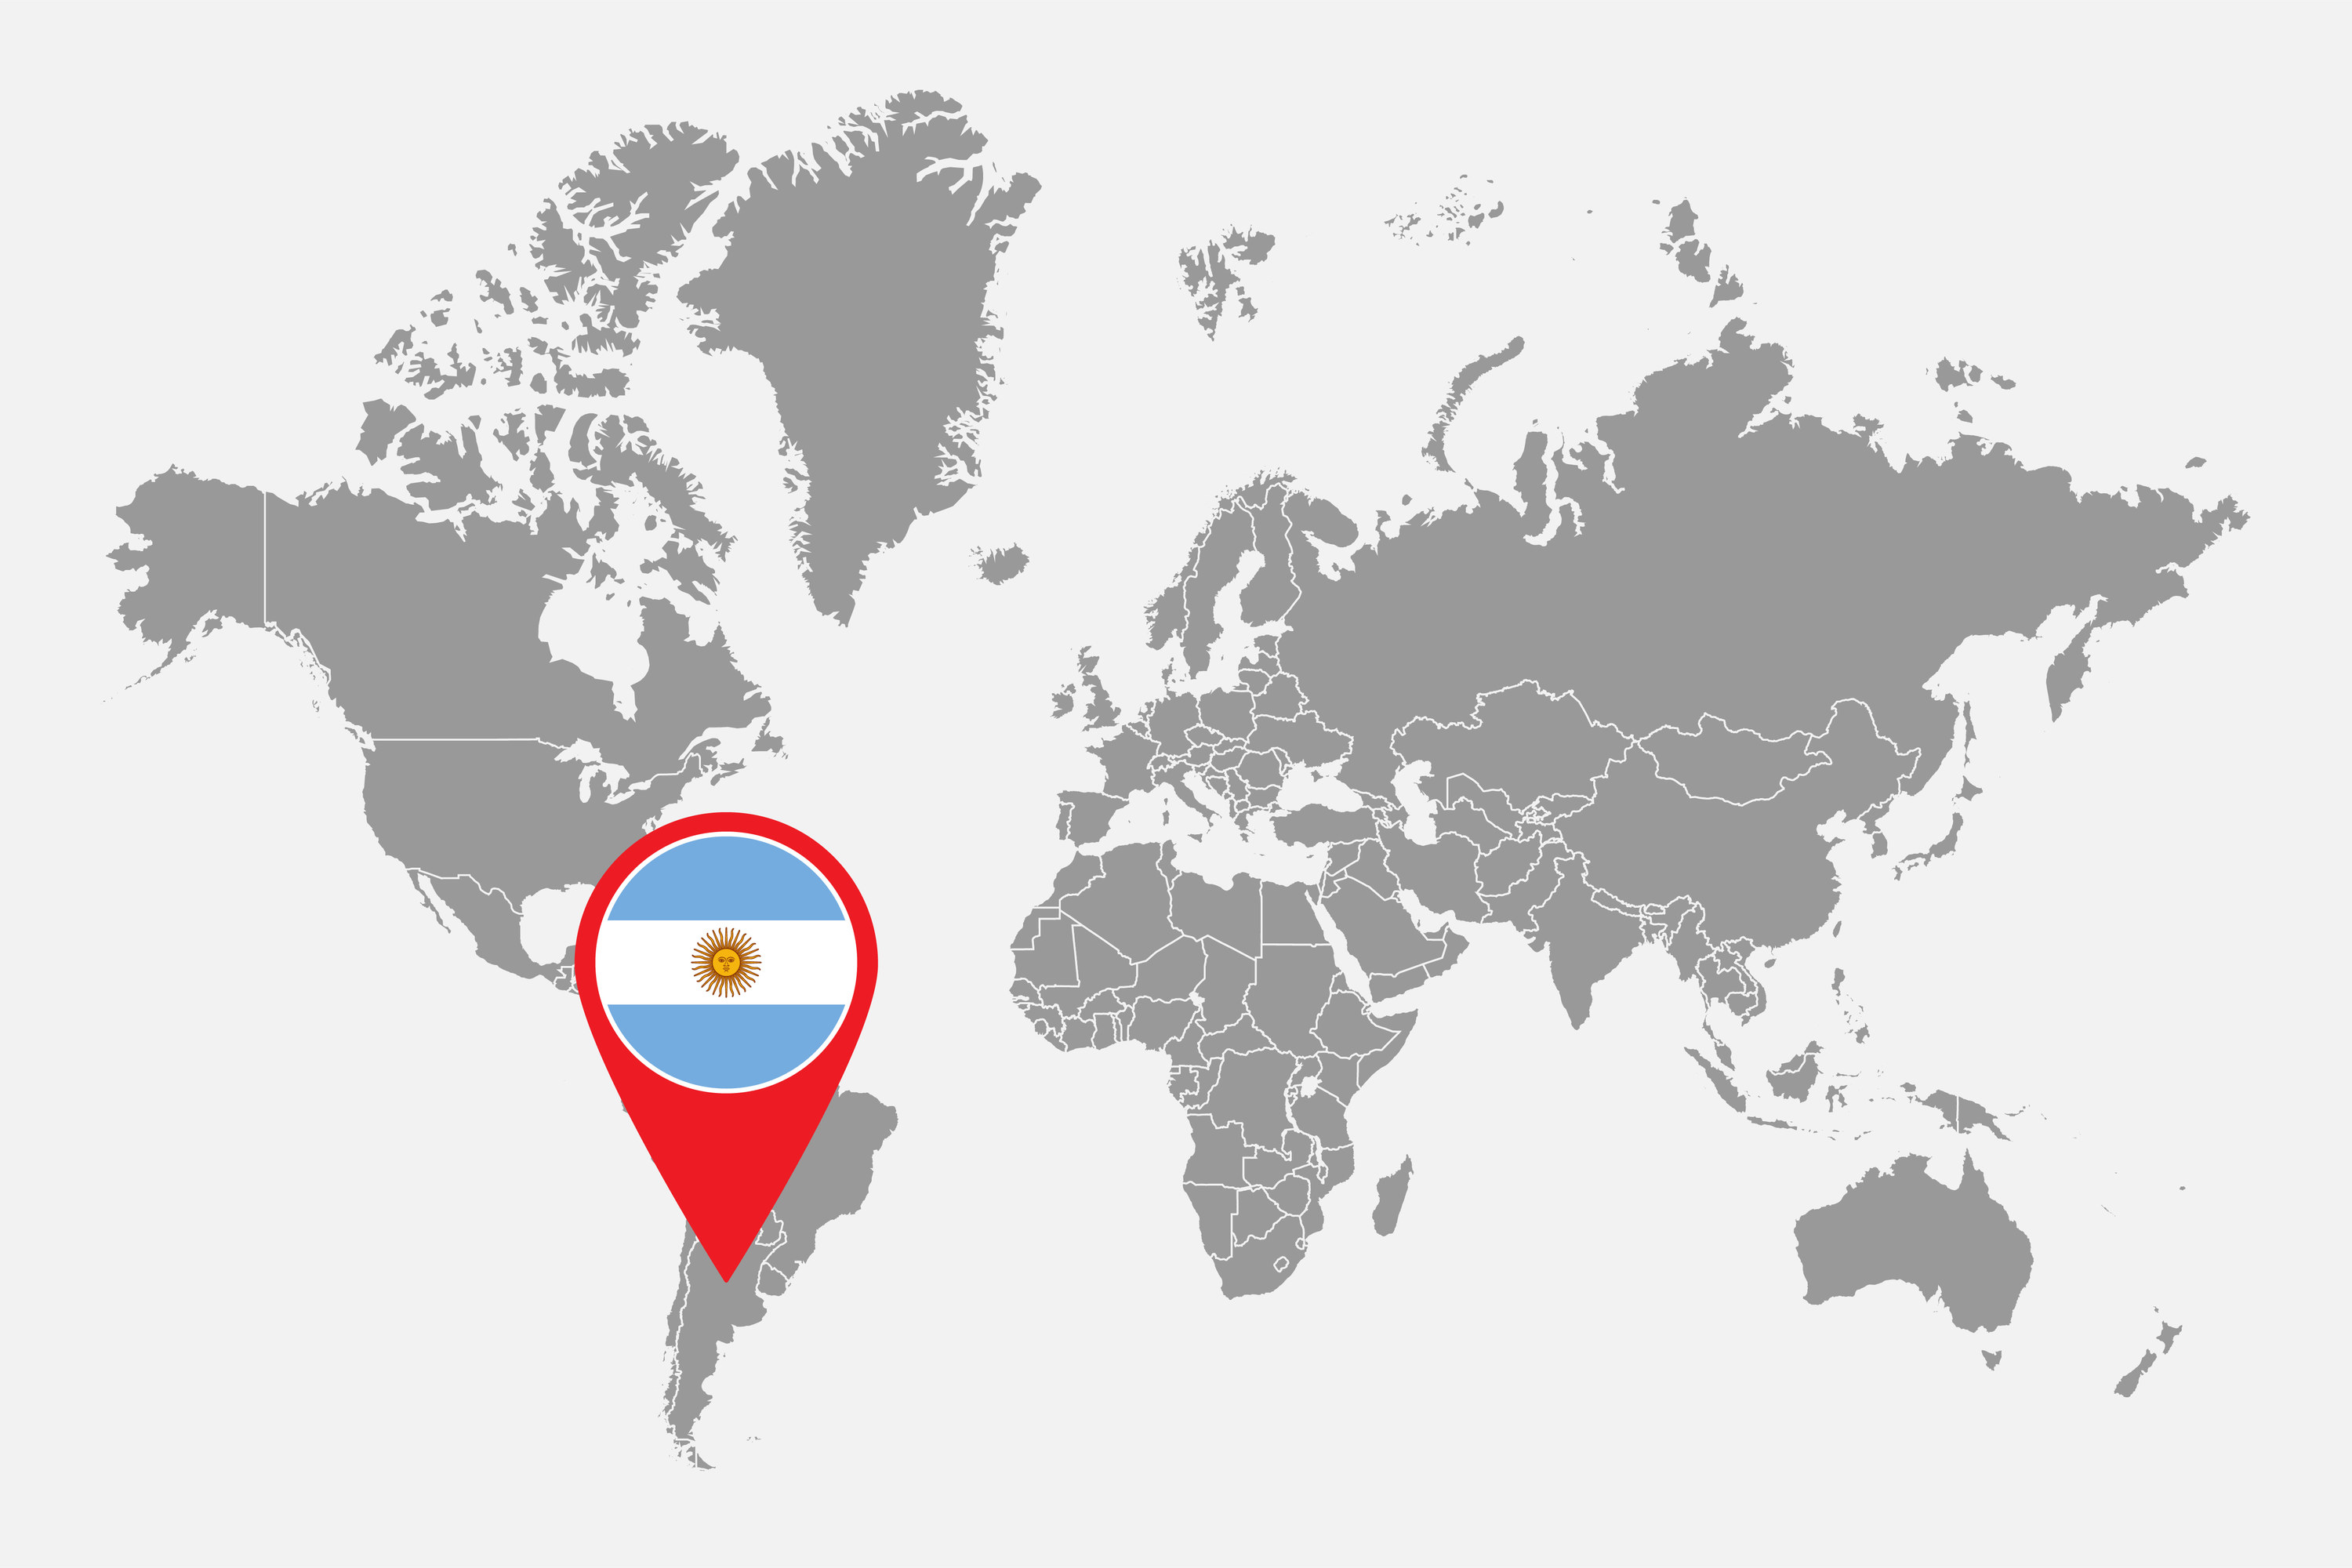 A world map with Argentina indicated